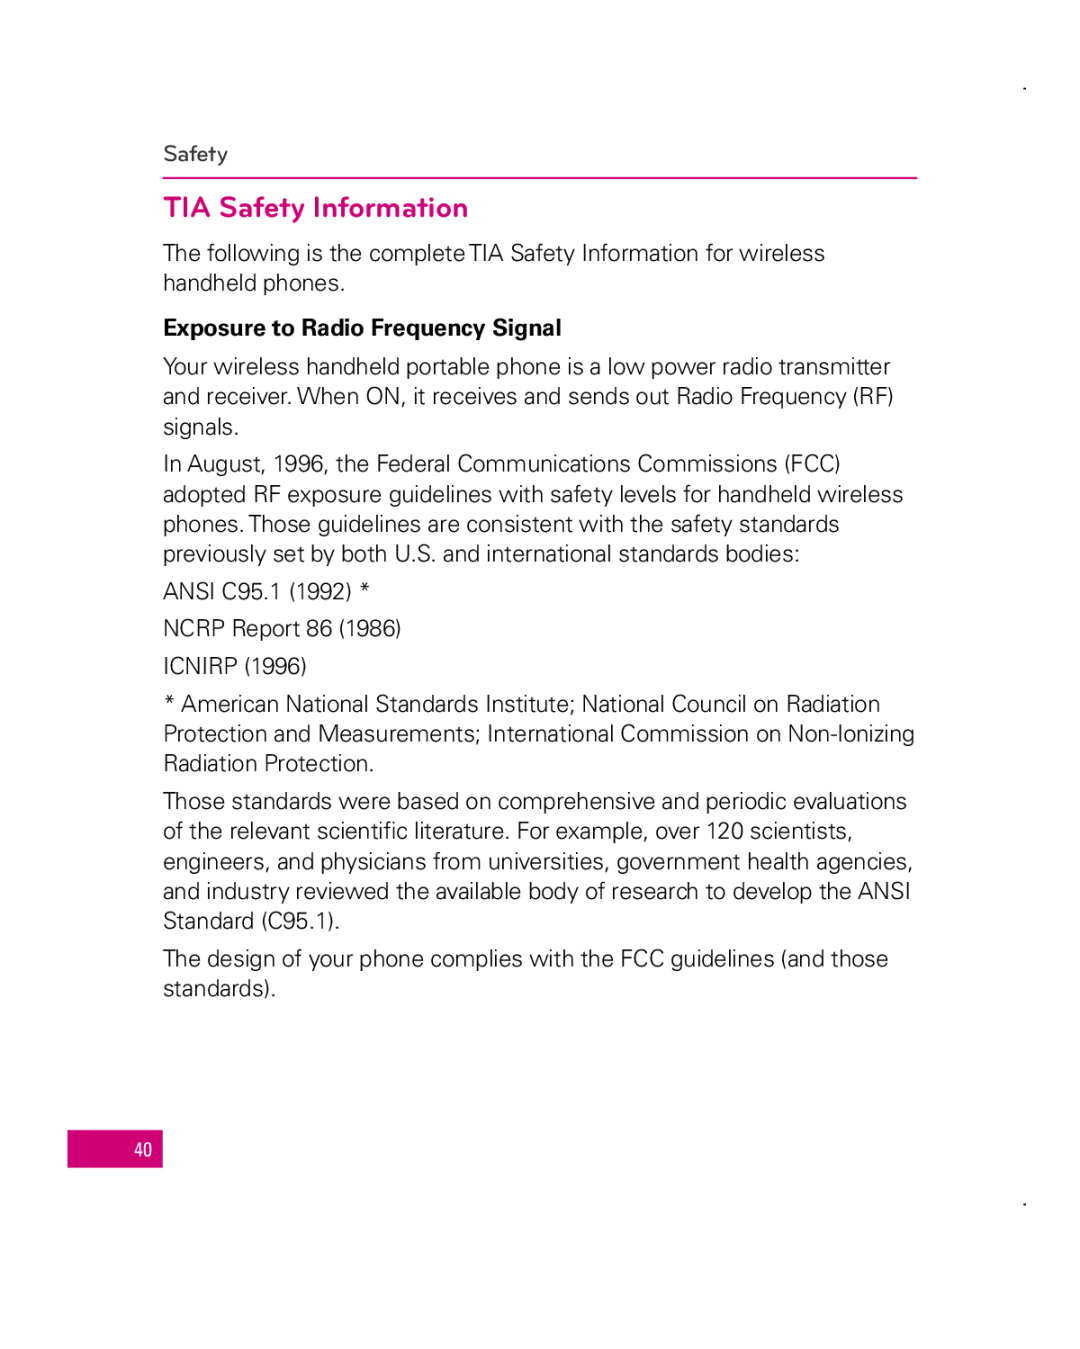 LG Electronics MFL67006501(1.0), Apex manual TIA Safety Information, Exposure to Radio Frequency Signal 